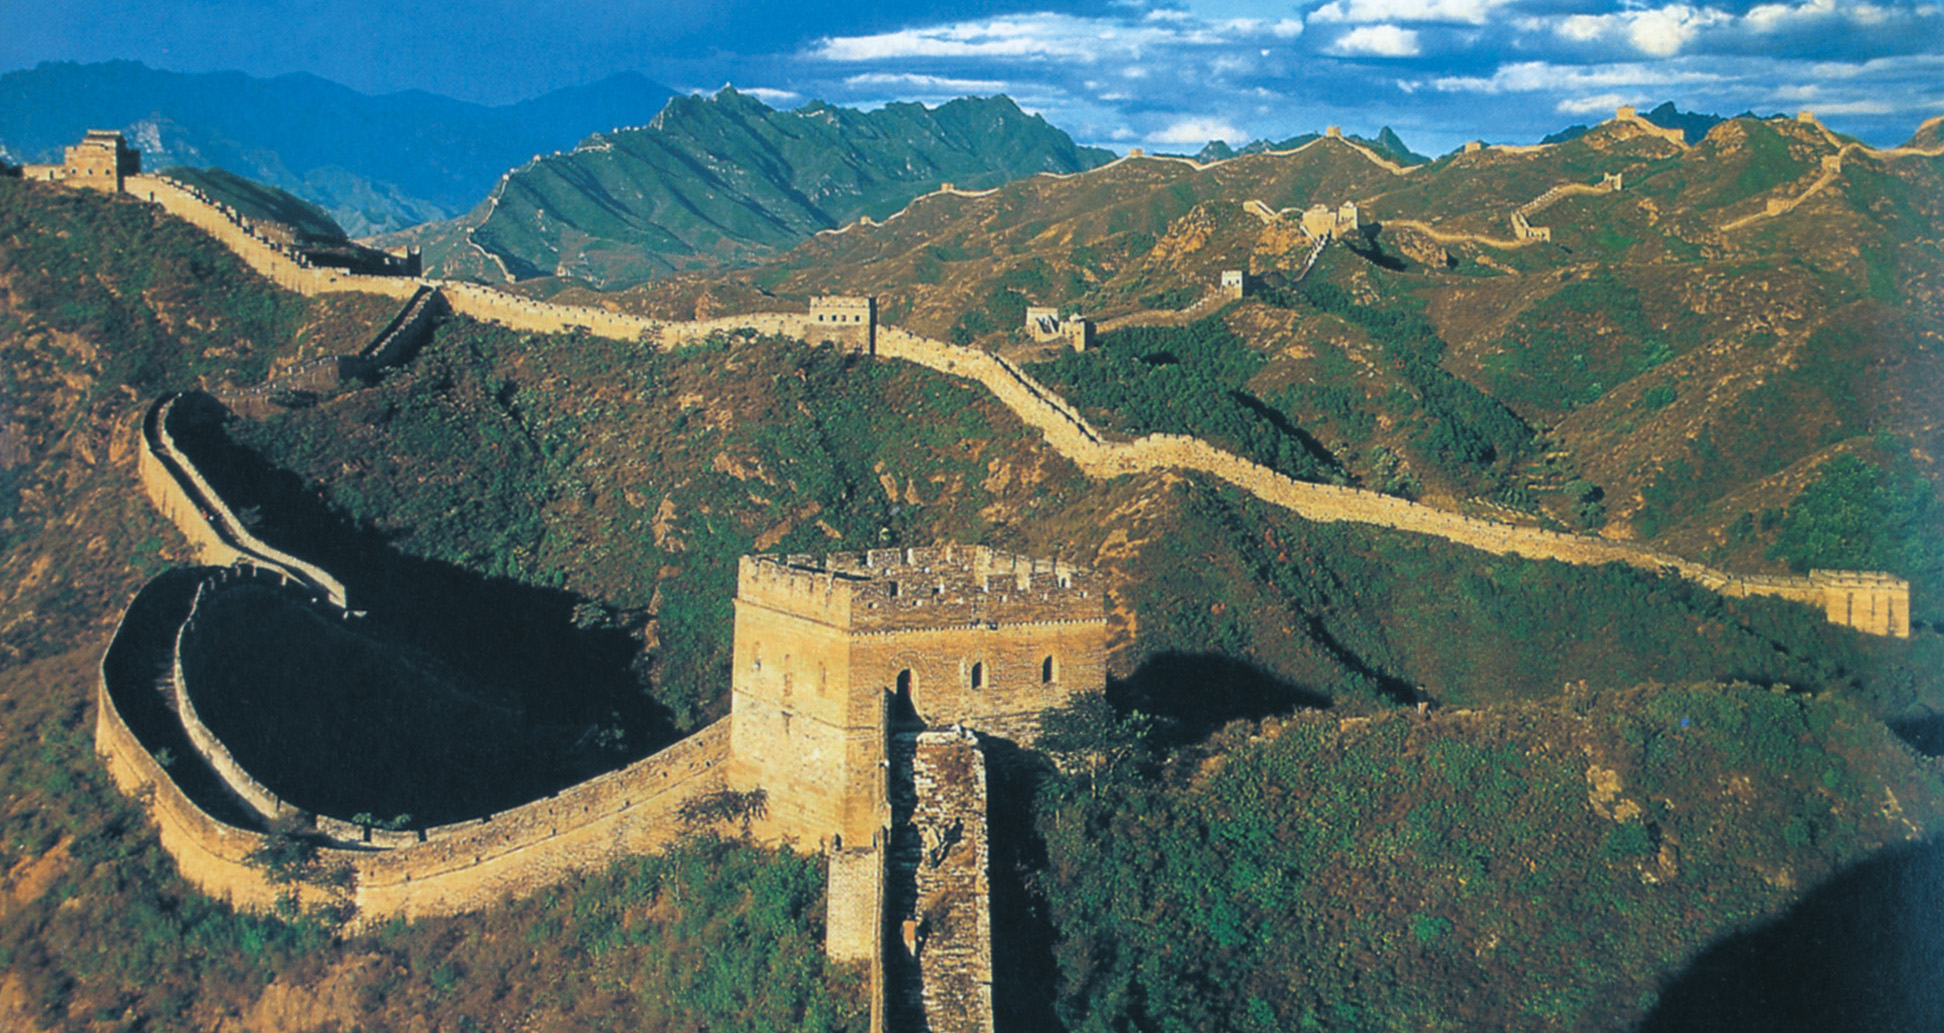 The Great Wall of China stretches 3,000 miles from the Pacific coast to the present-day Gansu province. The massive wall was to serve as Qin Shih Huang-ti’s northernmost fortification.